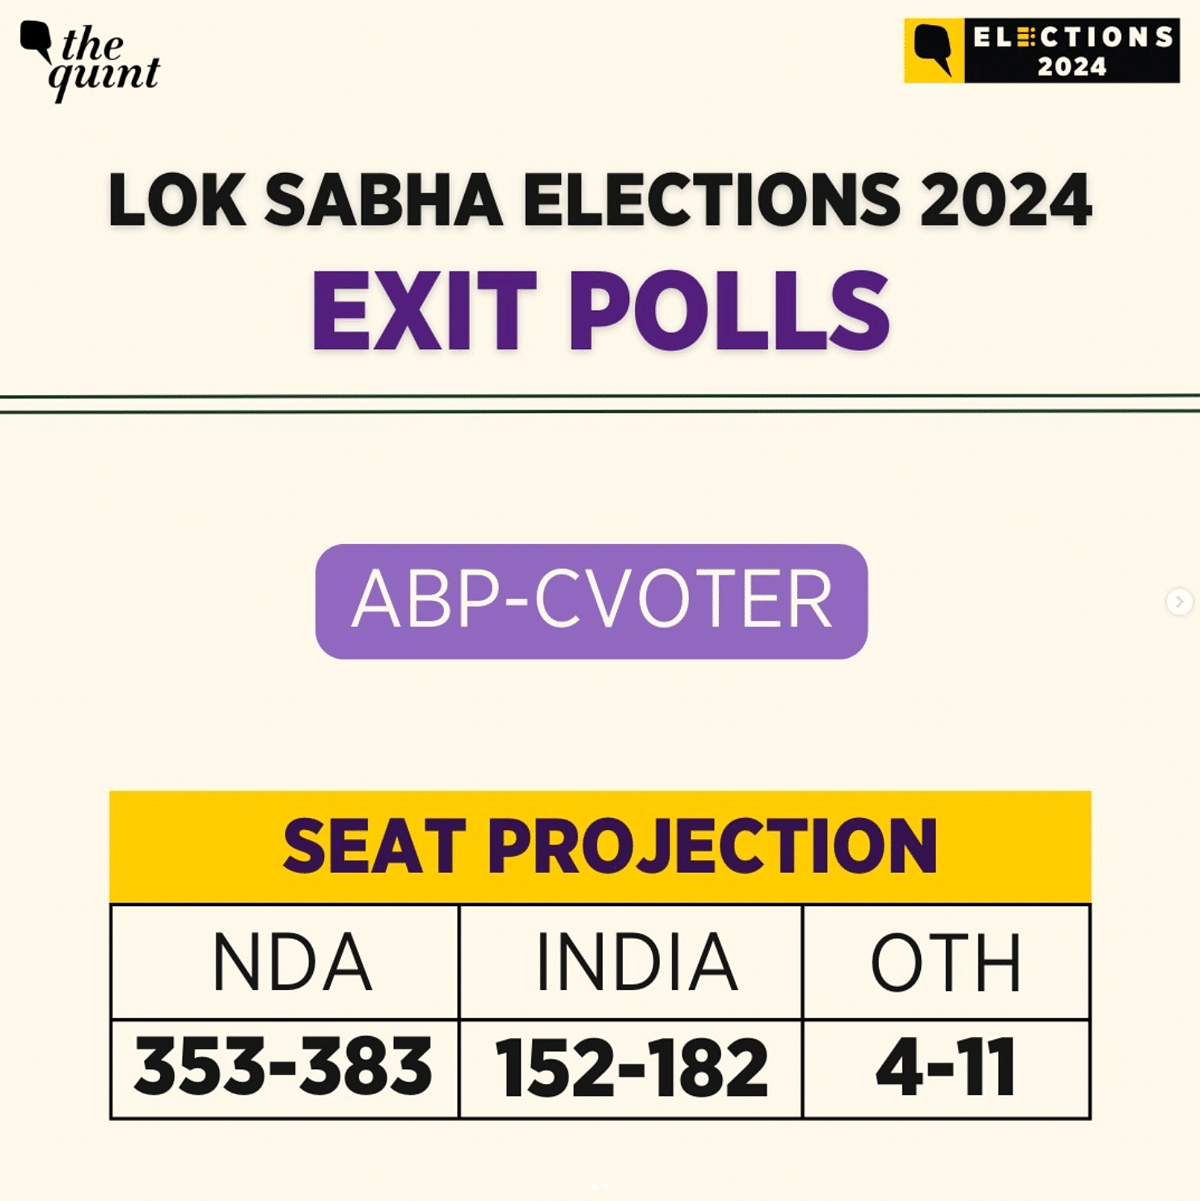 The India Today- Axis predicts that the saffron party will win 18 to 20 seats from the state in the Lok Sabha.